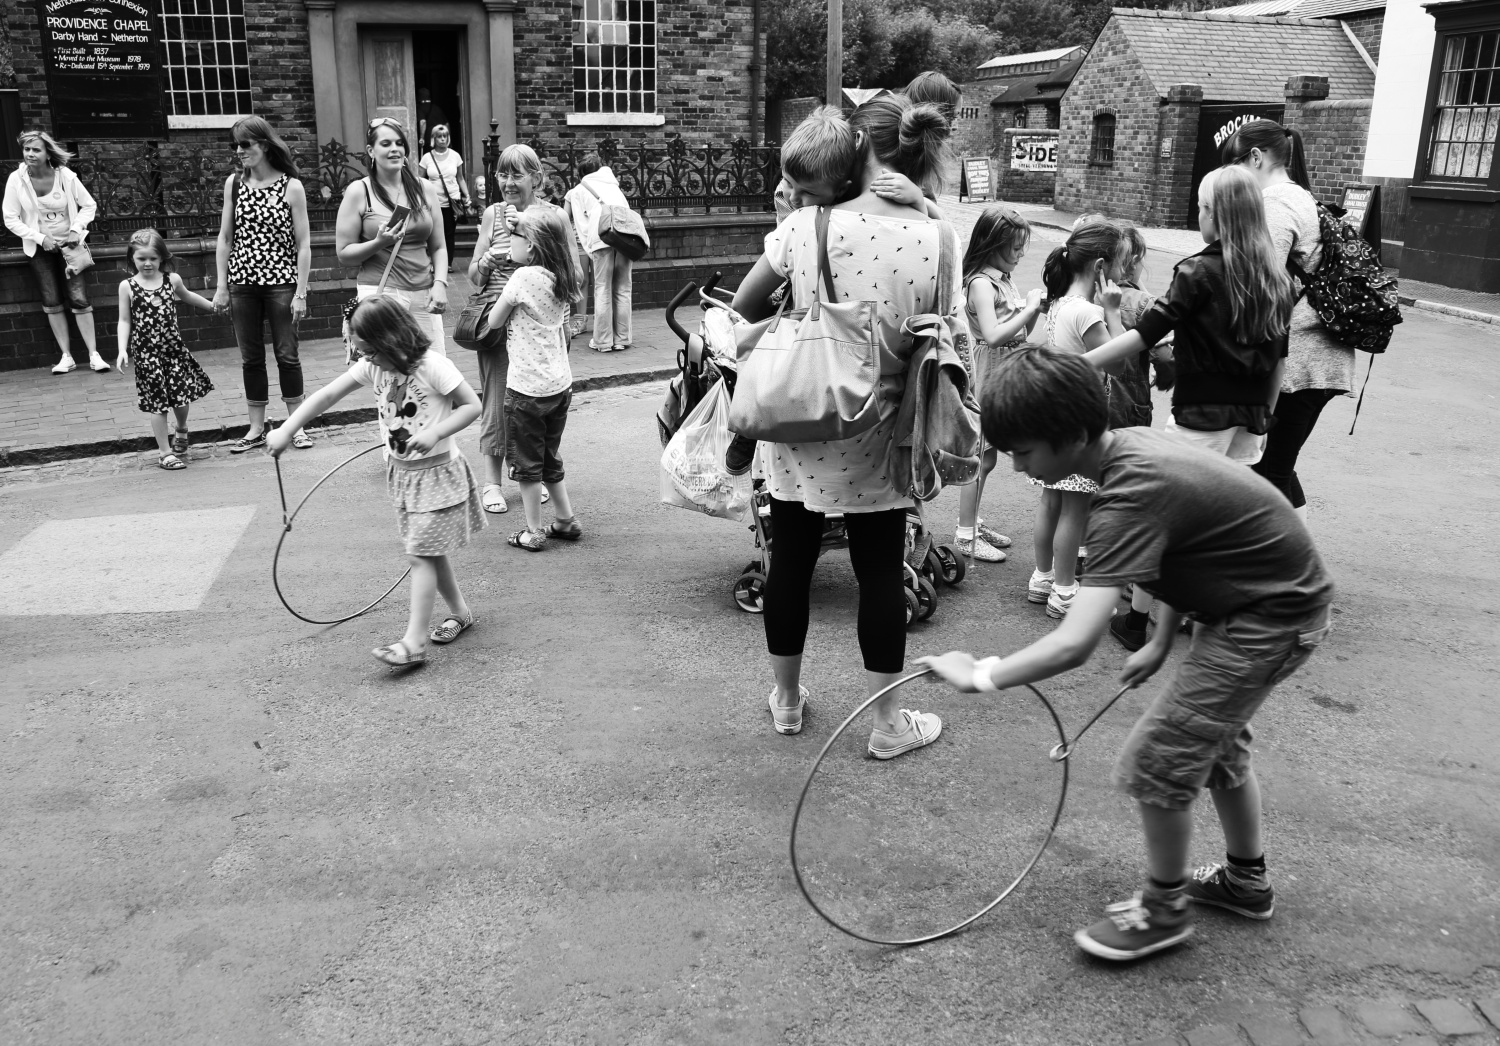 Children playing with metal hoop toys 1900s